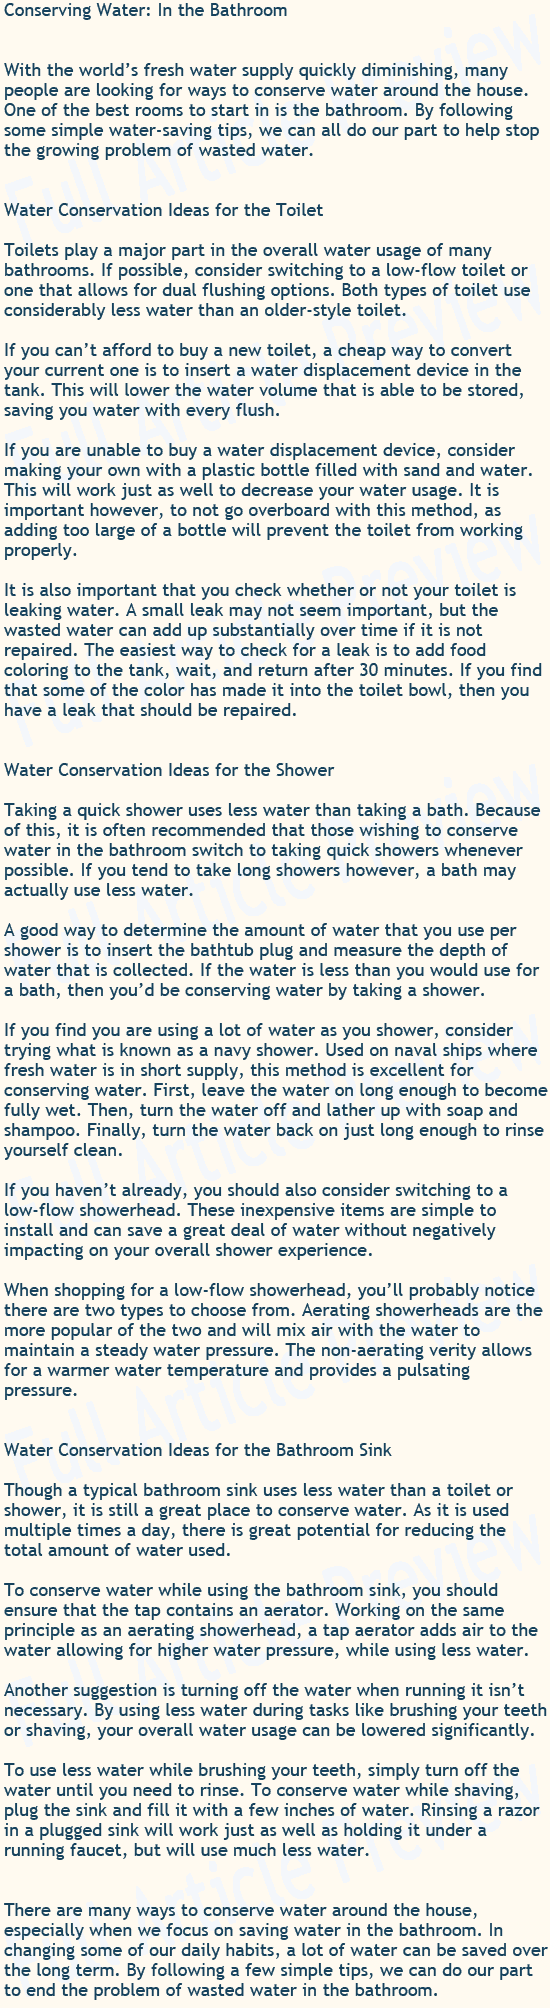 This article talks about ways to conserve water in your bathroom.